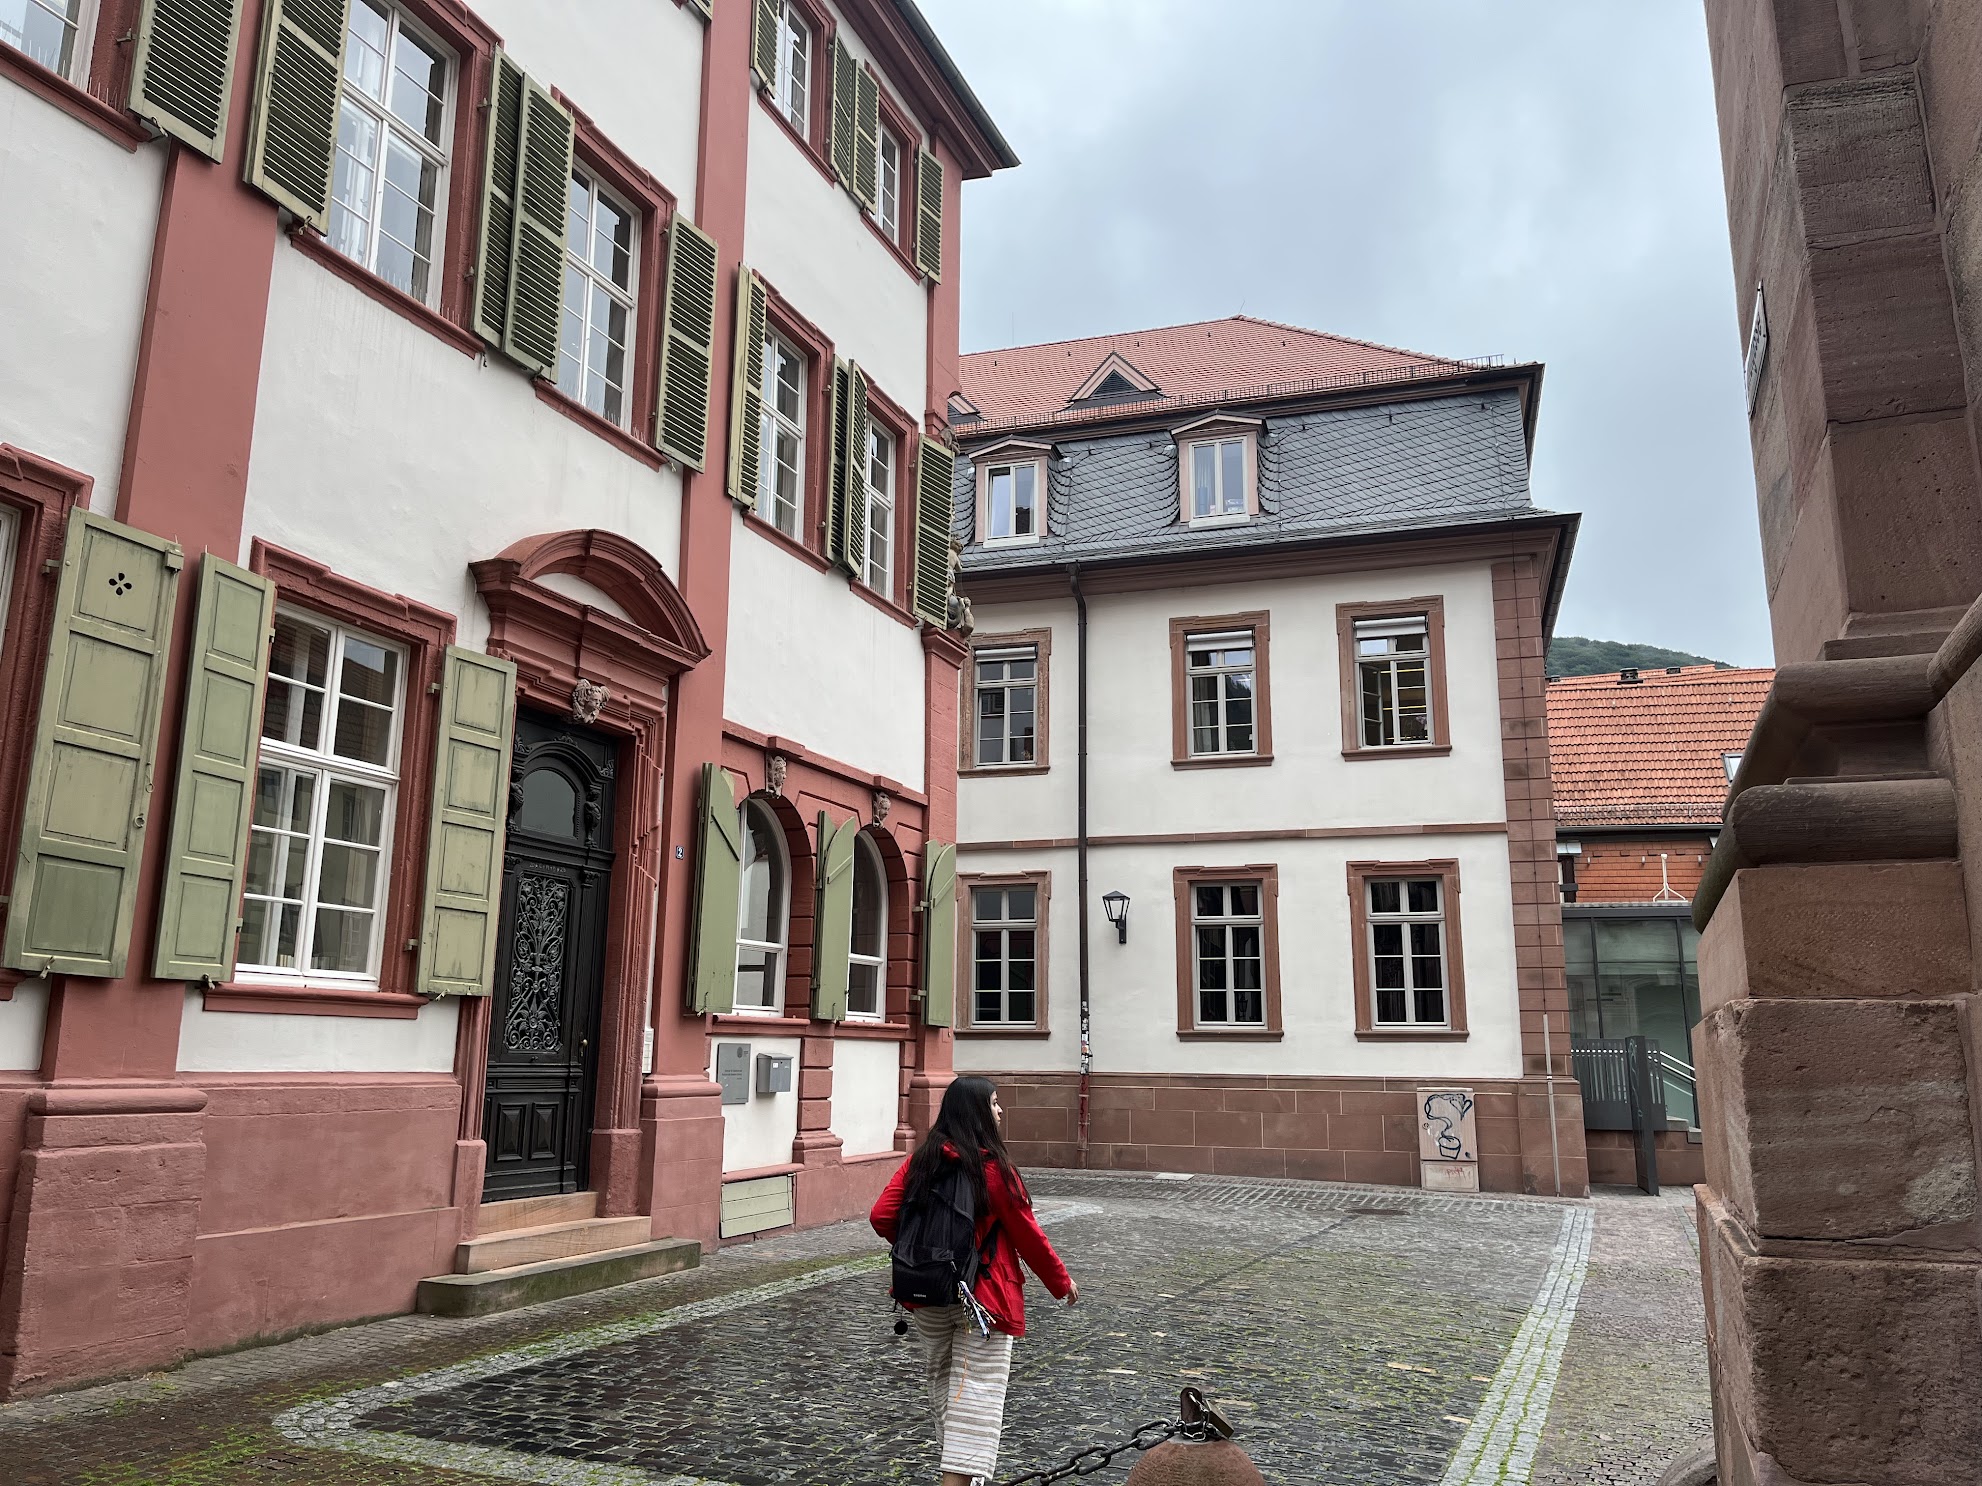 Altstadt - classical Heidelberg buildings have a red frame and white walls. Me walking in the middle of the photograph, with a red coat.